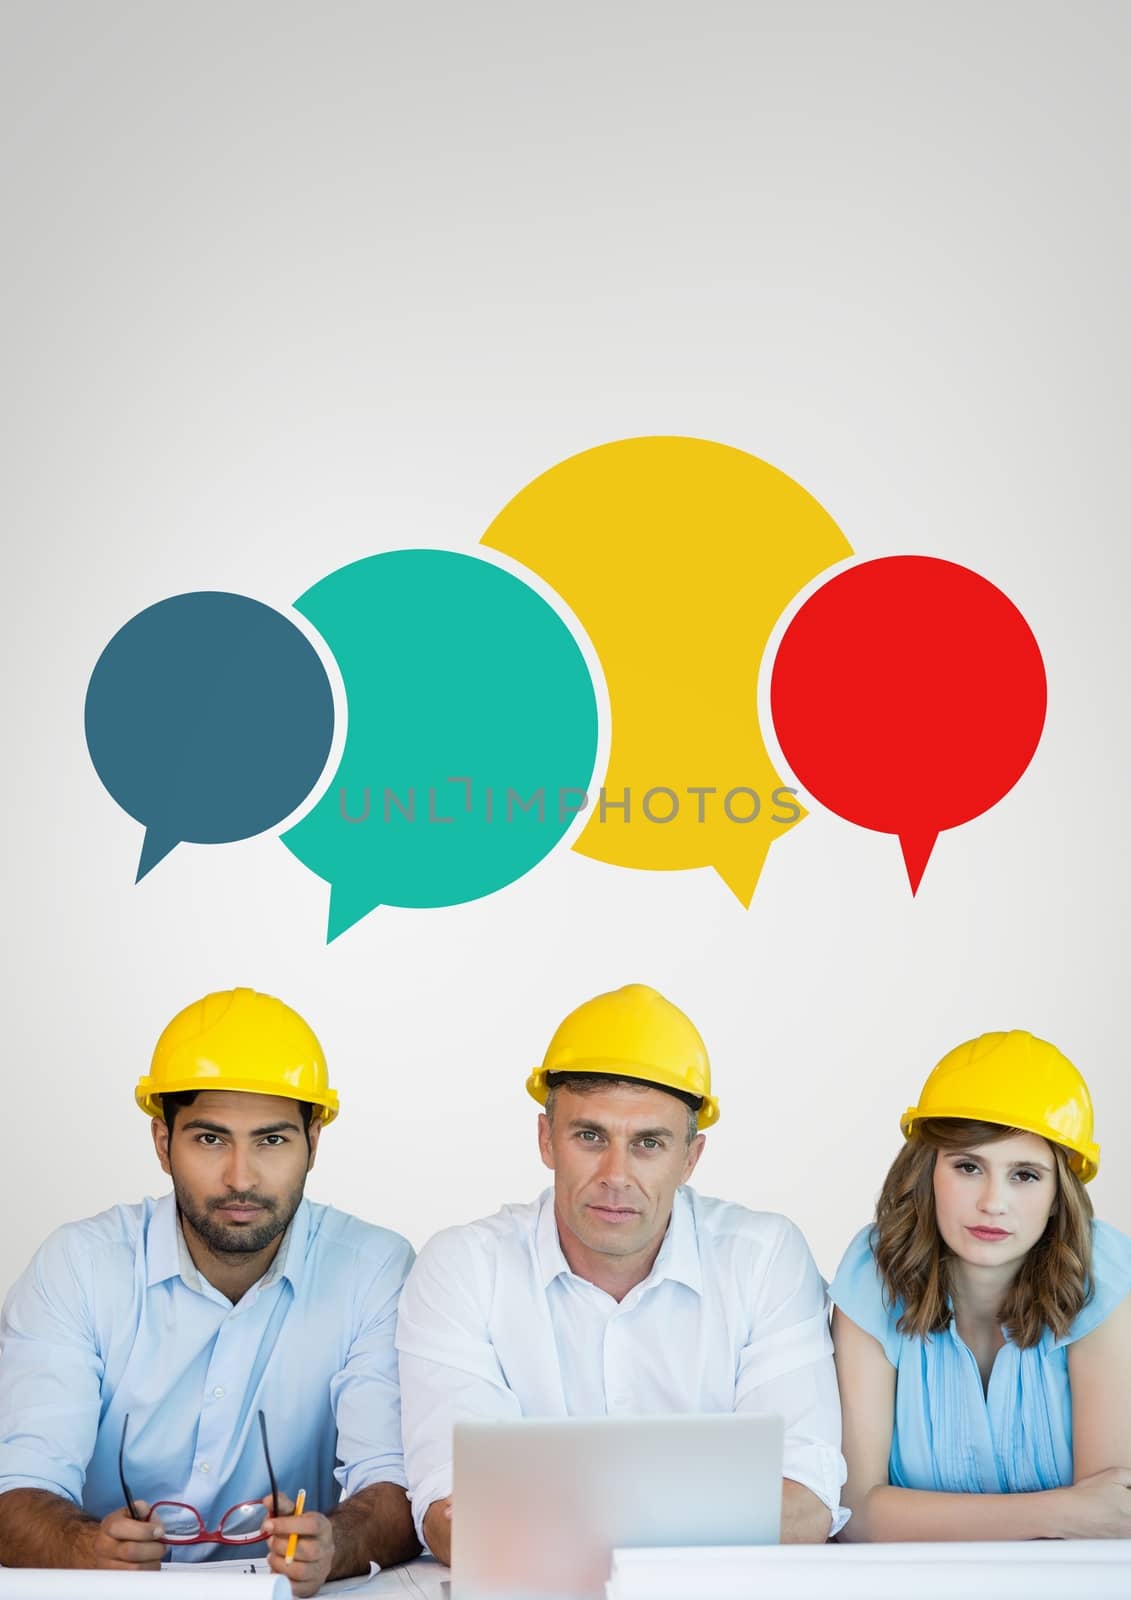 Construction people at a table with speech bubbles against grey background by Wavebreakmedia